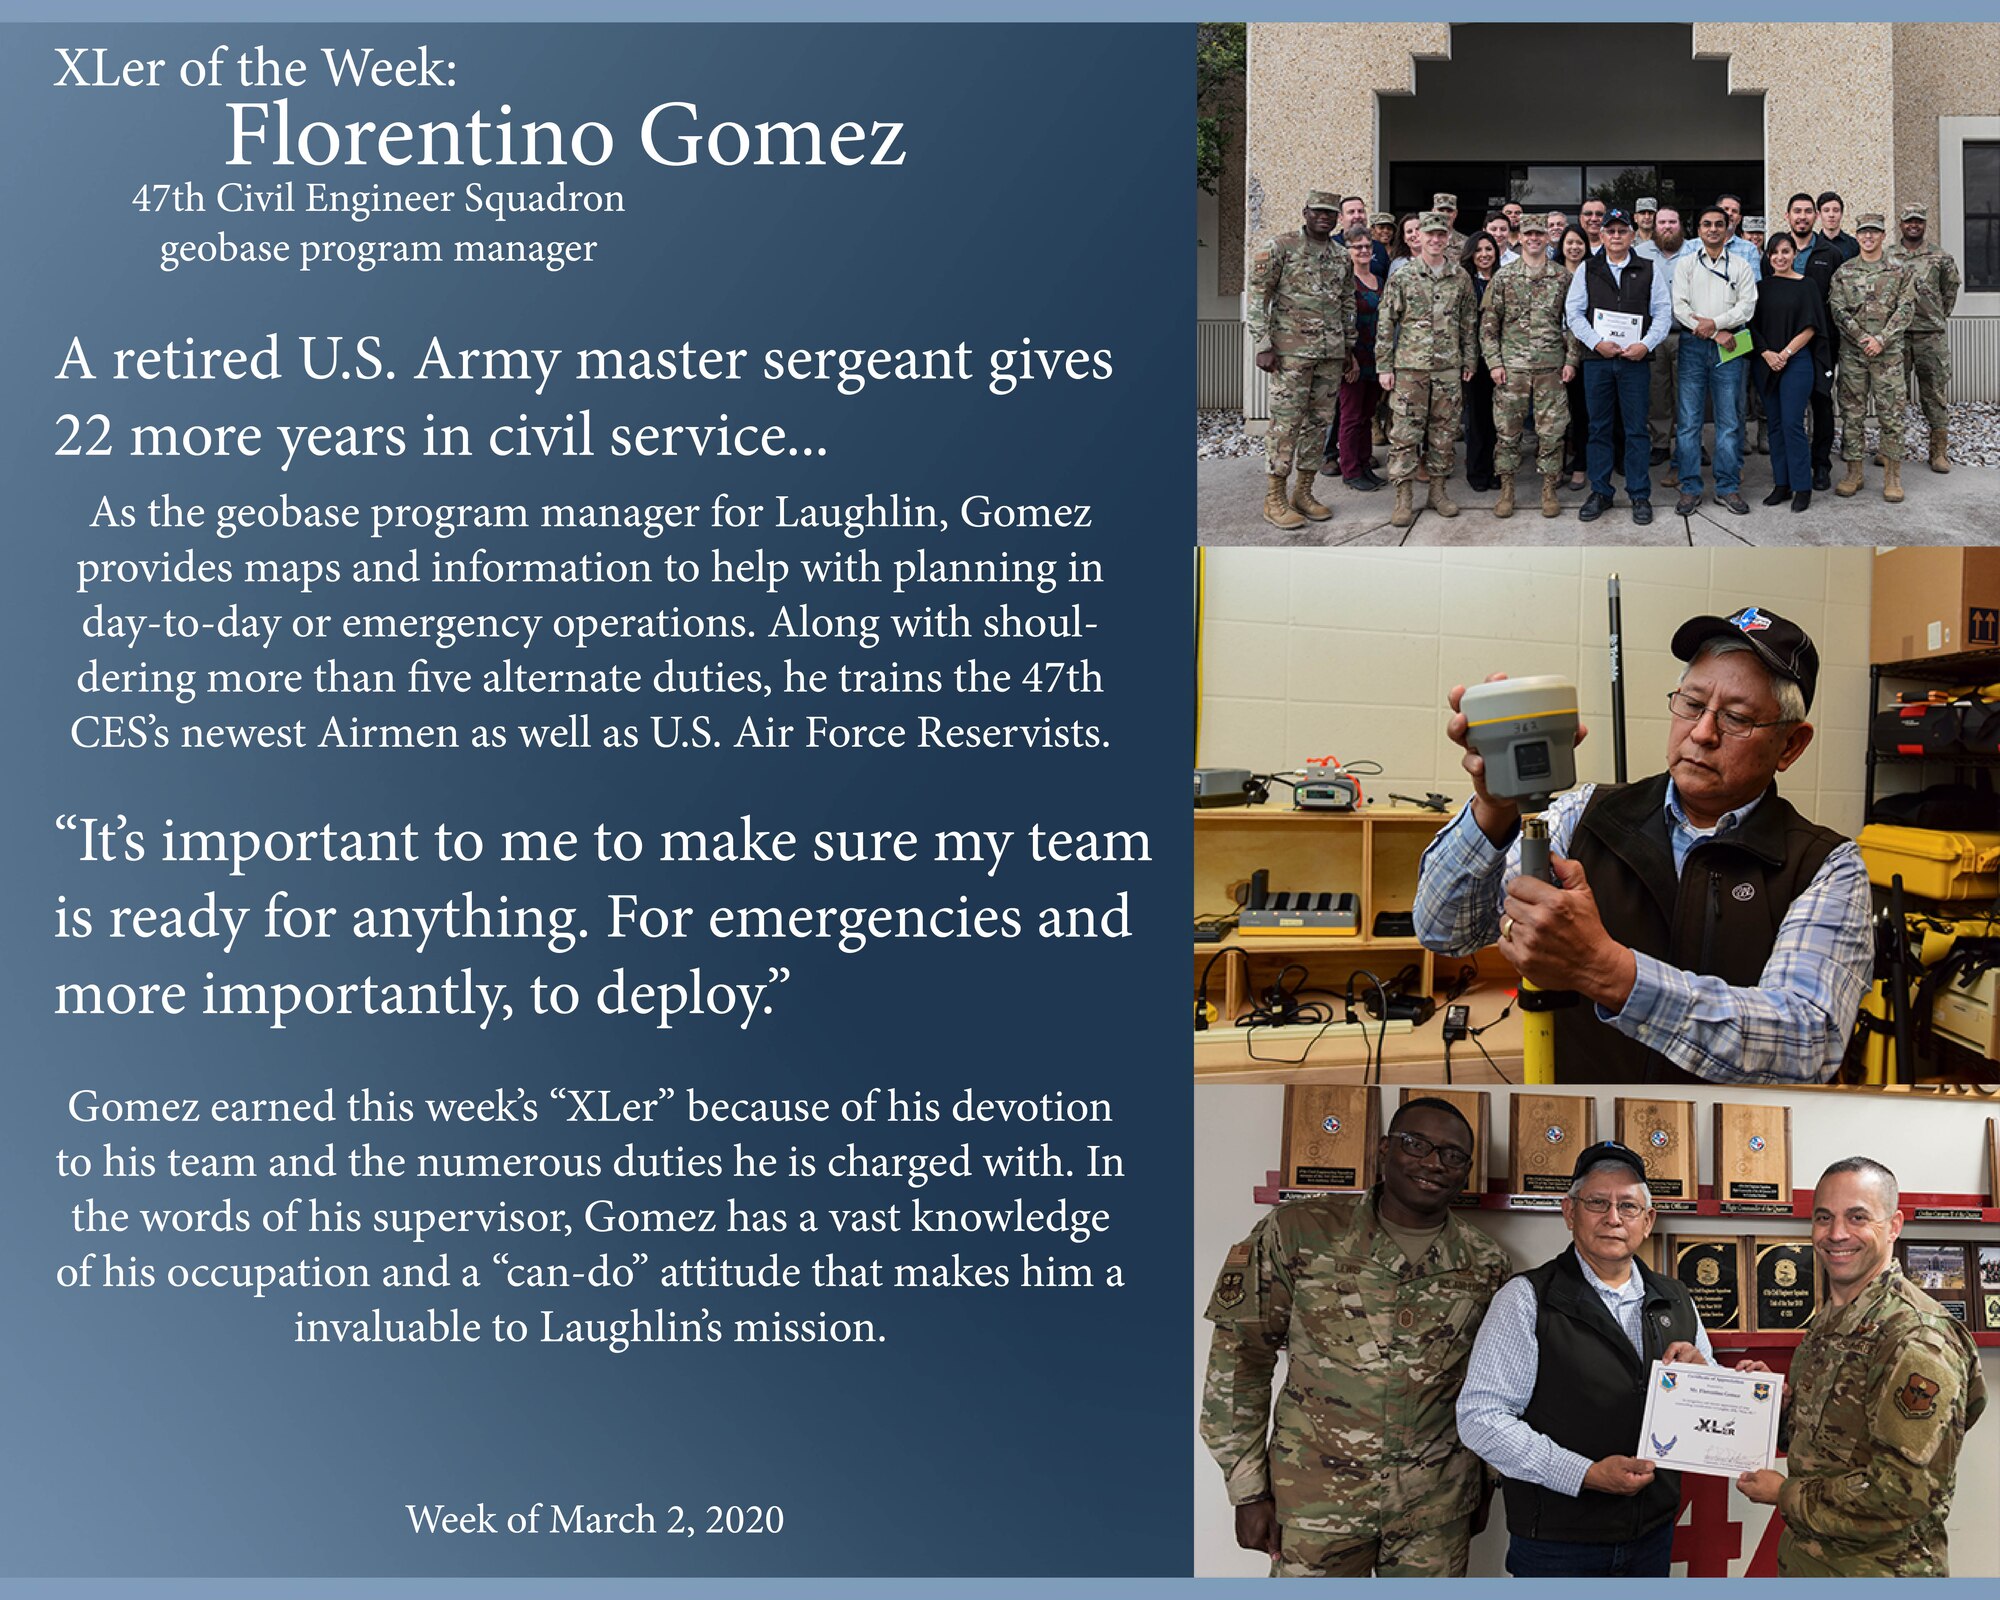 Florentino Gomez, 47th Civil Engineer Squadron geospace program manager, was chosen by wing leadership to be the “XLer of the Week” of March 2, 2020 at Laughlin Air Force Base, Texas. The “XLer” award, presented by Col. Lee Gentile, 47th Flying Training Wing commander, and Chief Master Sgt. Brian Lewis, 47th Operations Group superintendent, is given to those who consistently make outstanding contributions to their unit and the Laughlin mission. (U.S. Air Force Graphic by Senior Airman Anne McCready)